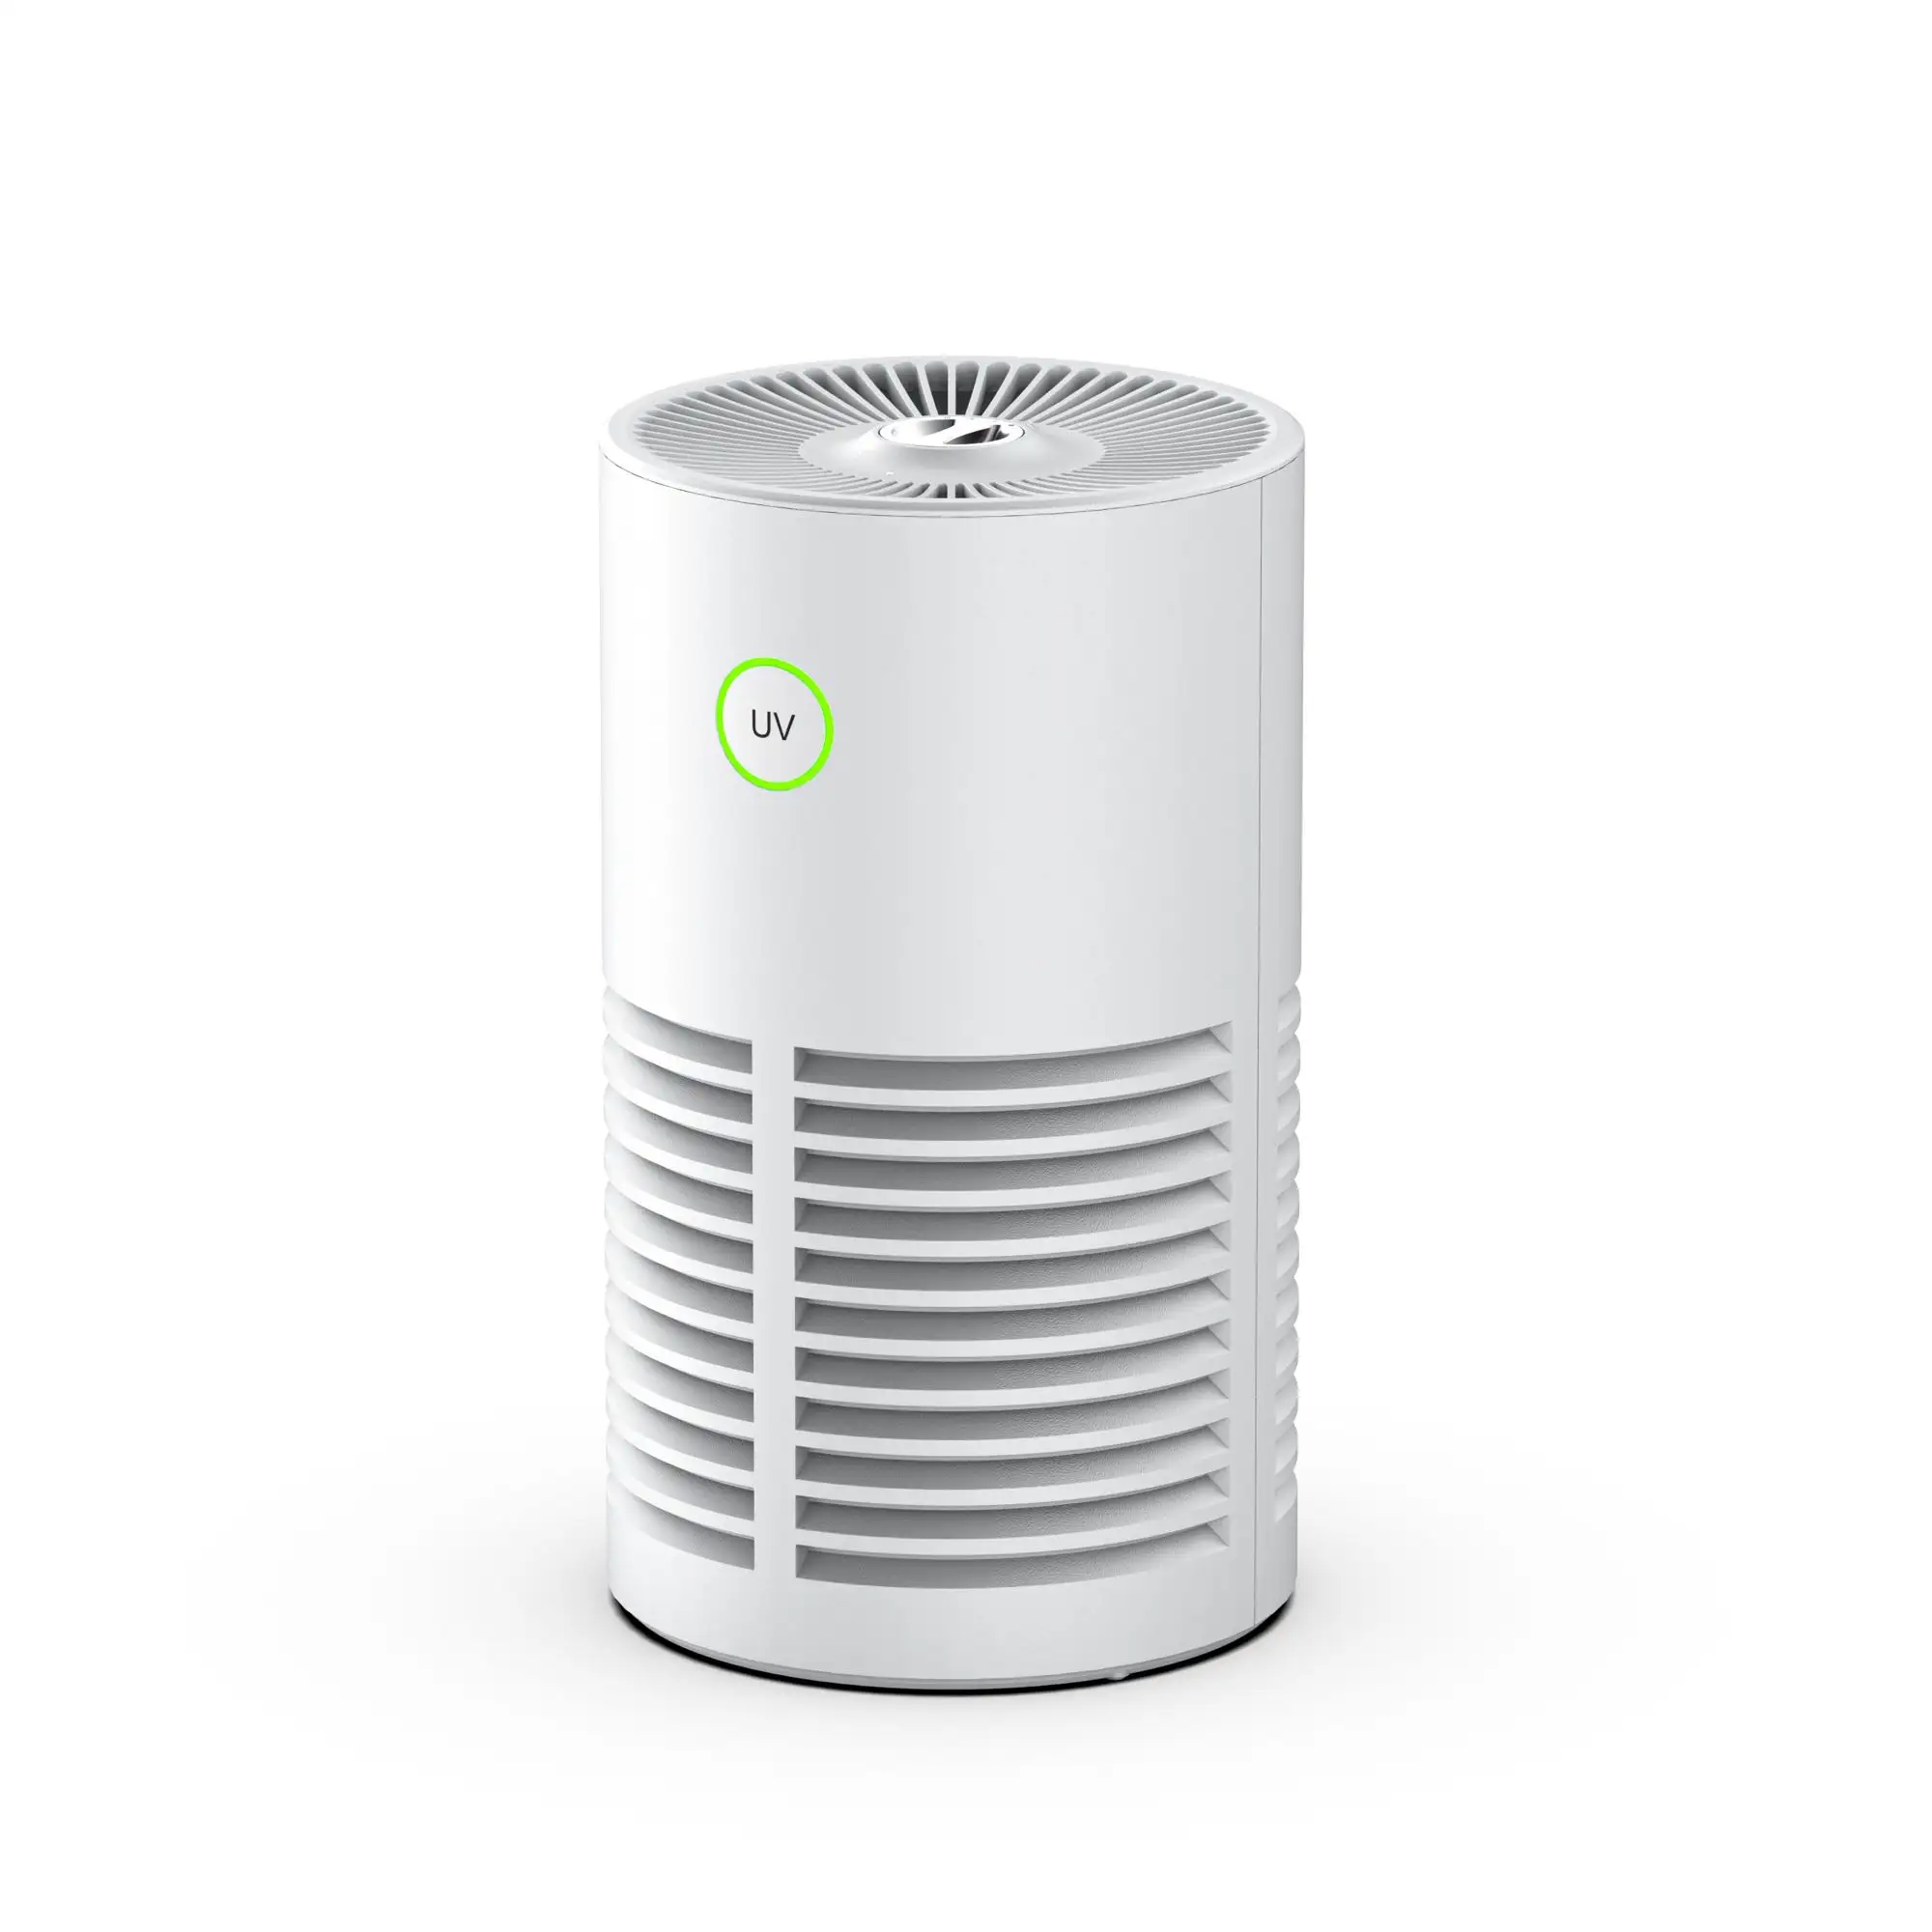 Making Indoor Air Better with an Antibacterial Air Purifier